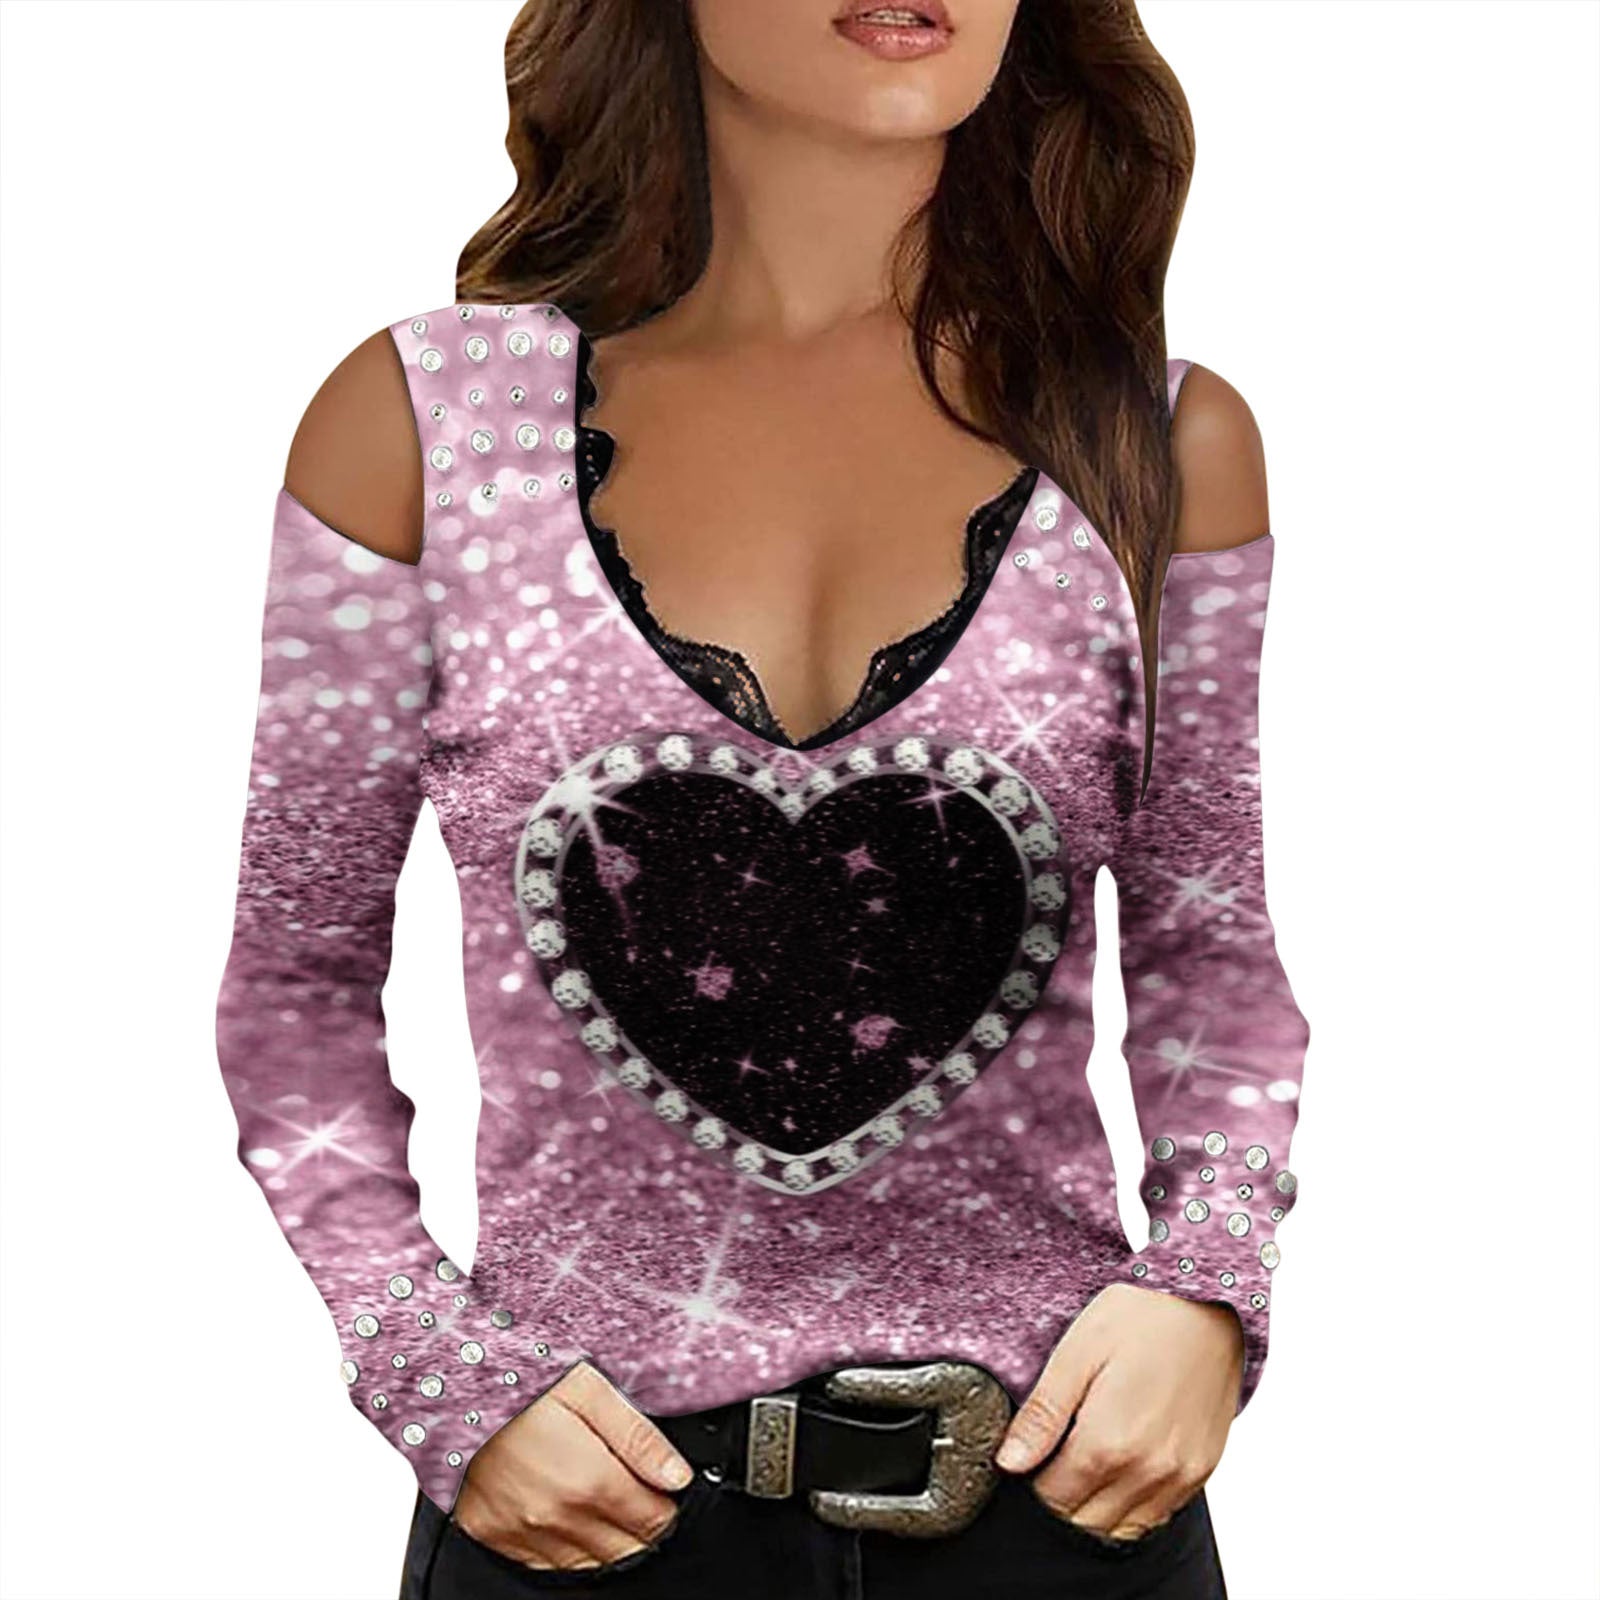 Rhinestone Lace Printed Sleeve Love Butterfly Tops